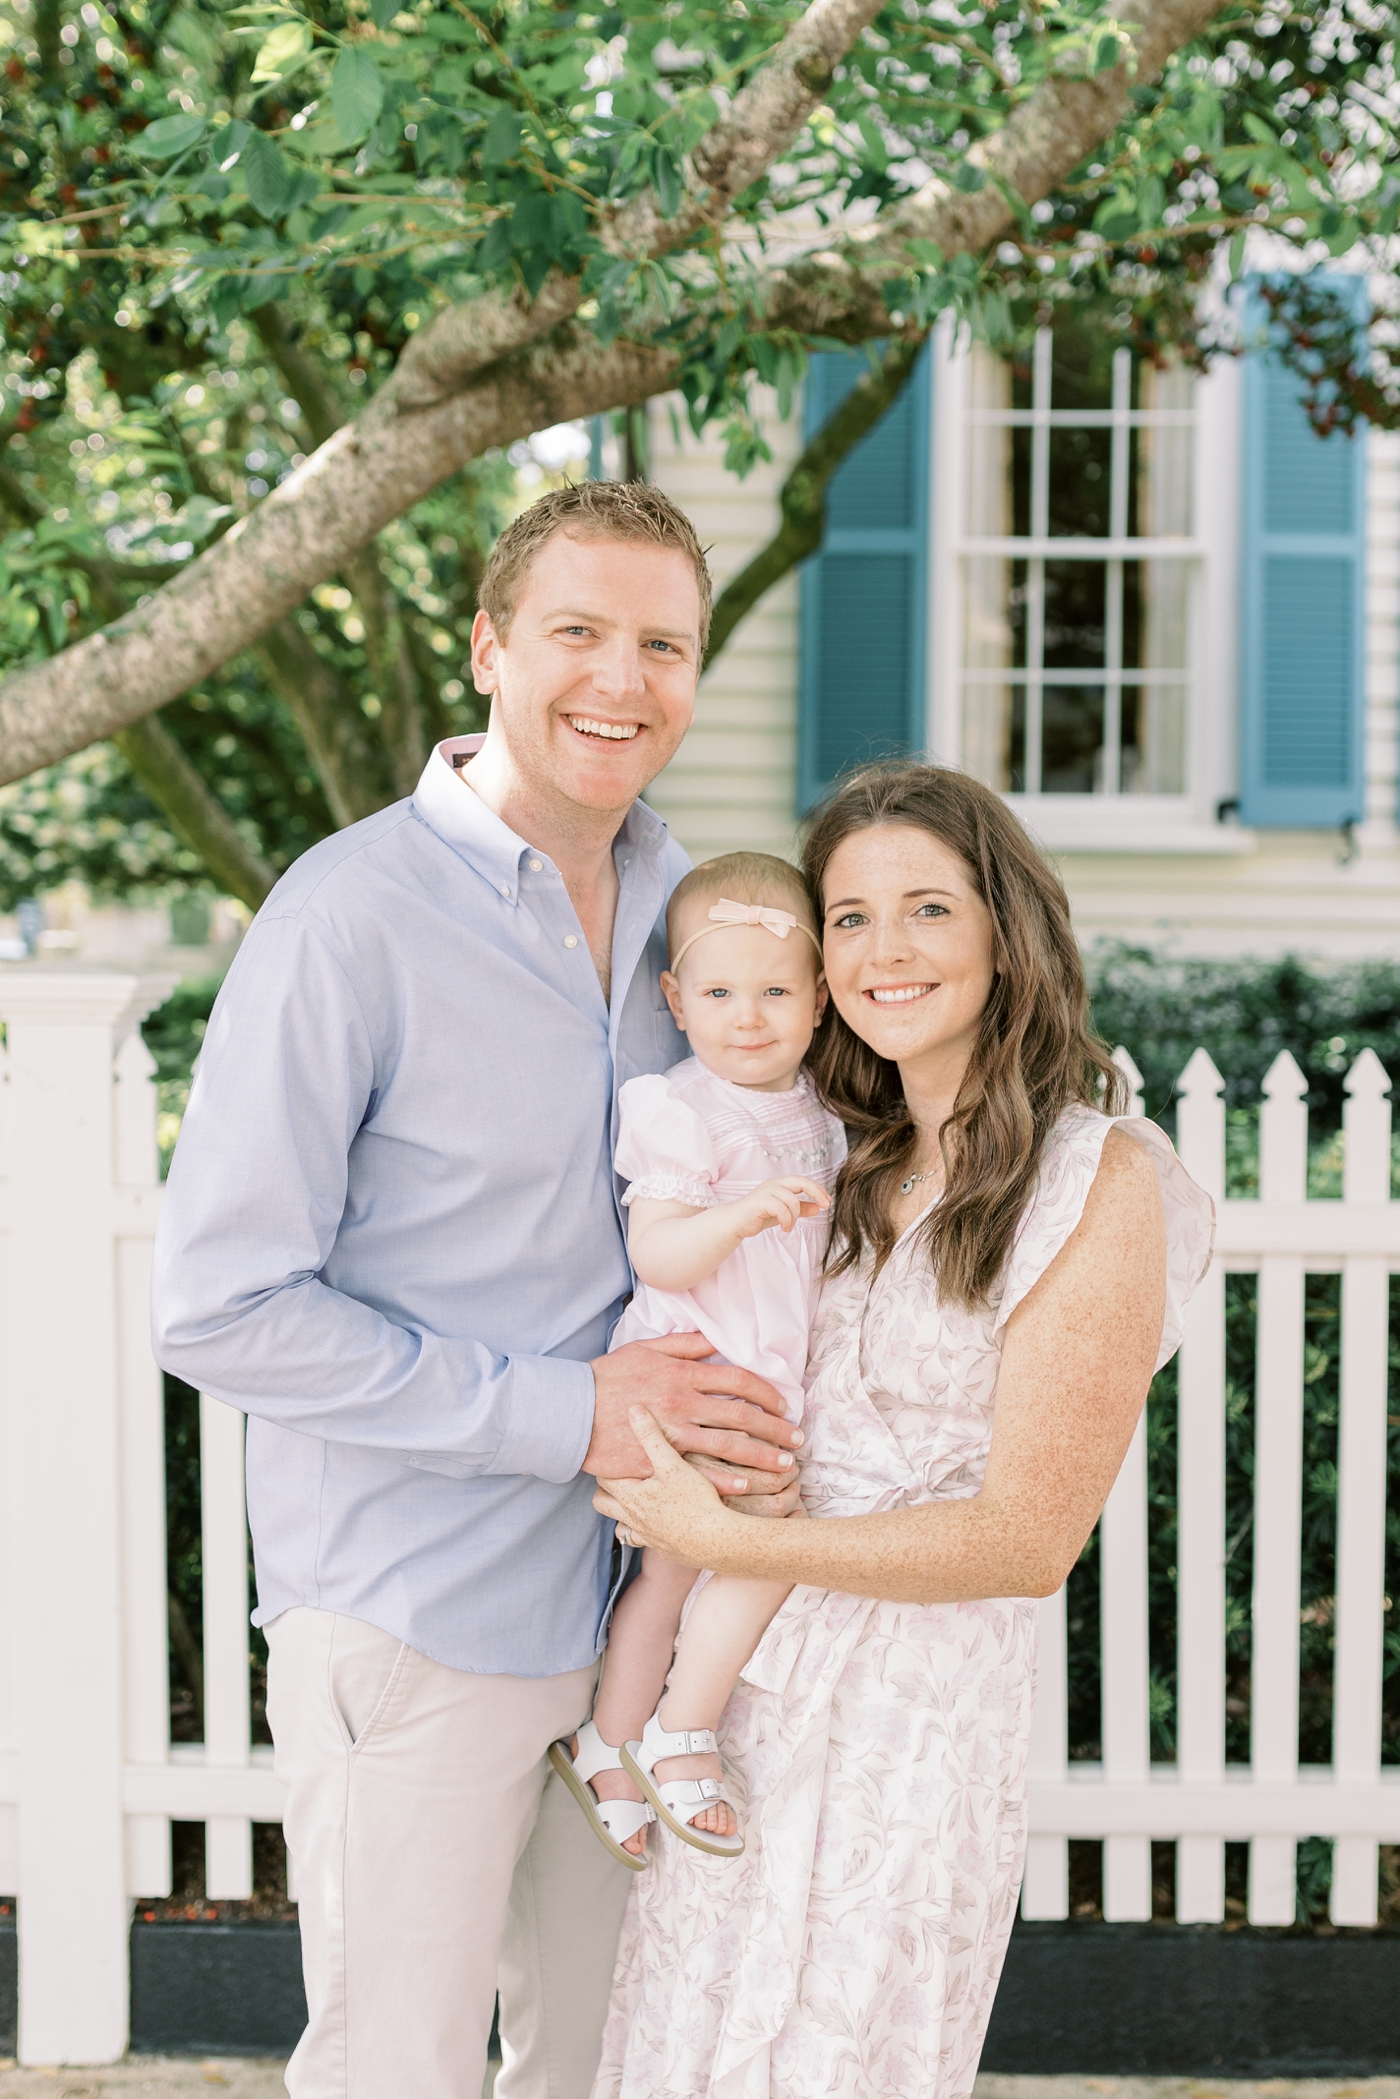 Mom and dad with baby girl smiling in front of picket fence | Photo by Caitlyn Motycka Photography.